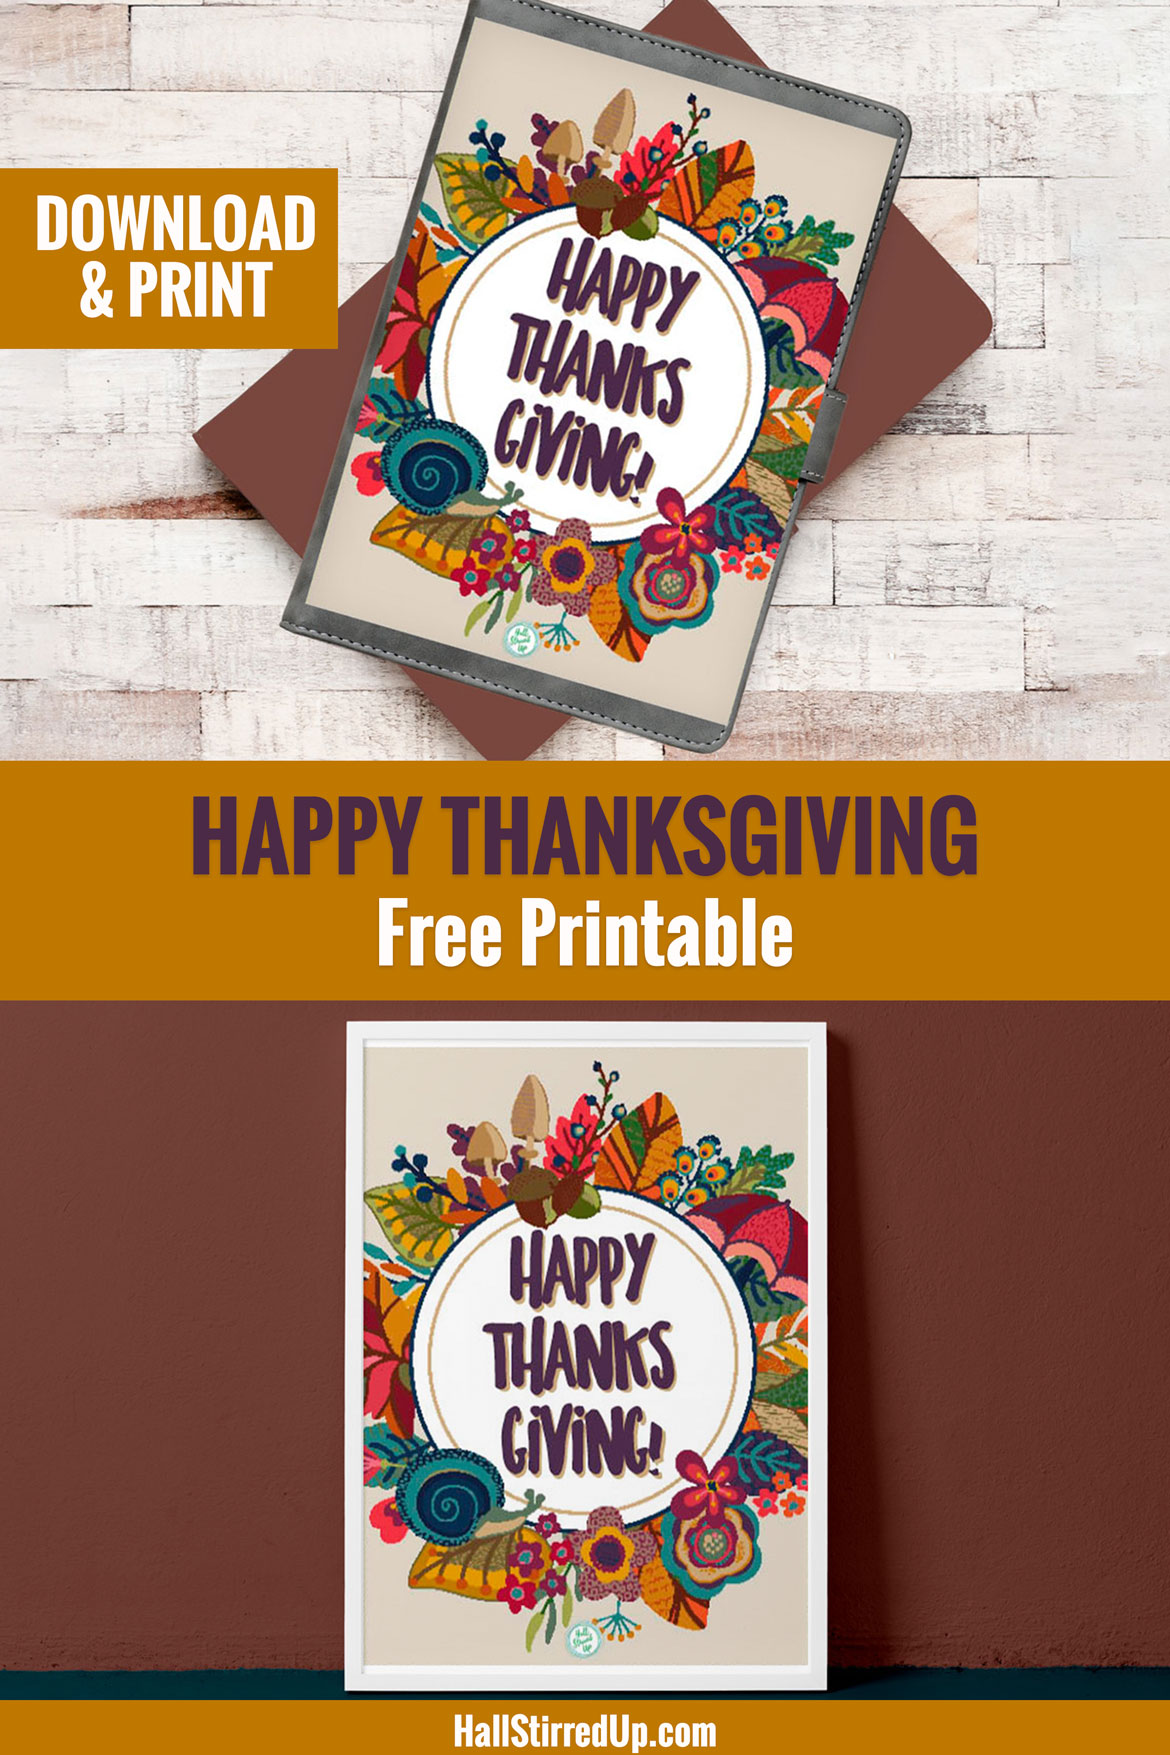 Happy Thanksgiving and a new free printable